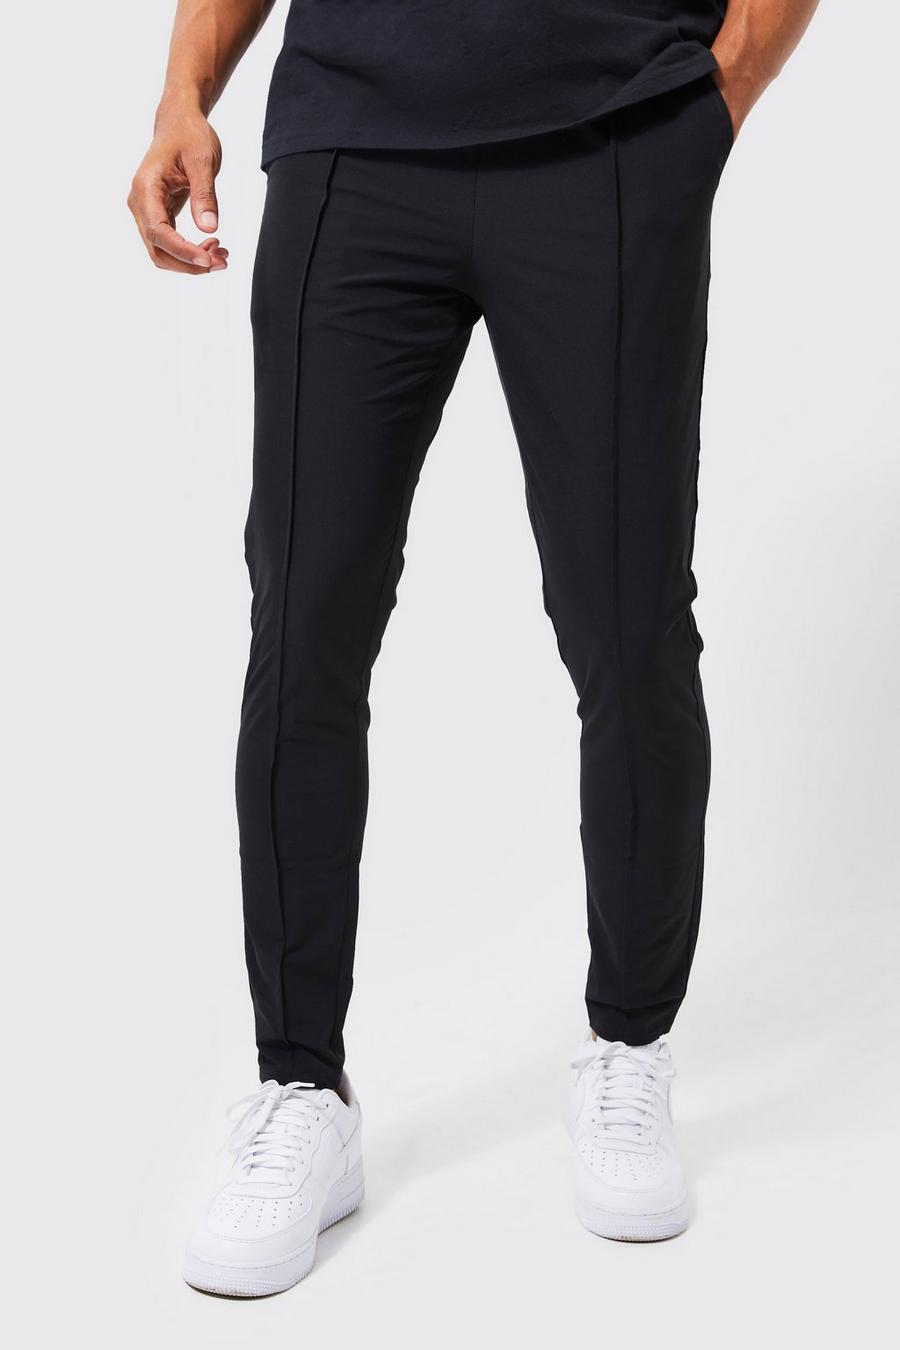 Black Elasticated Waist Skinny Stretch Golf Trousers image number 1